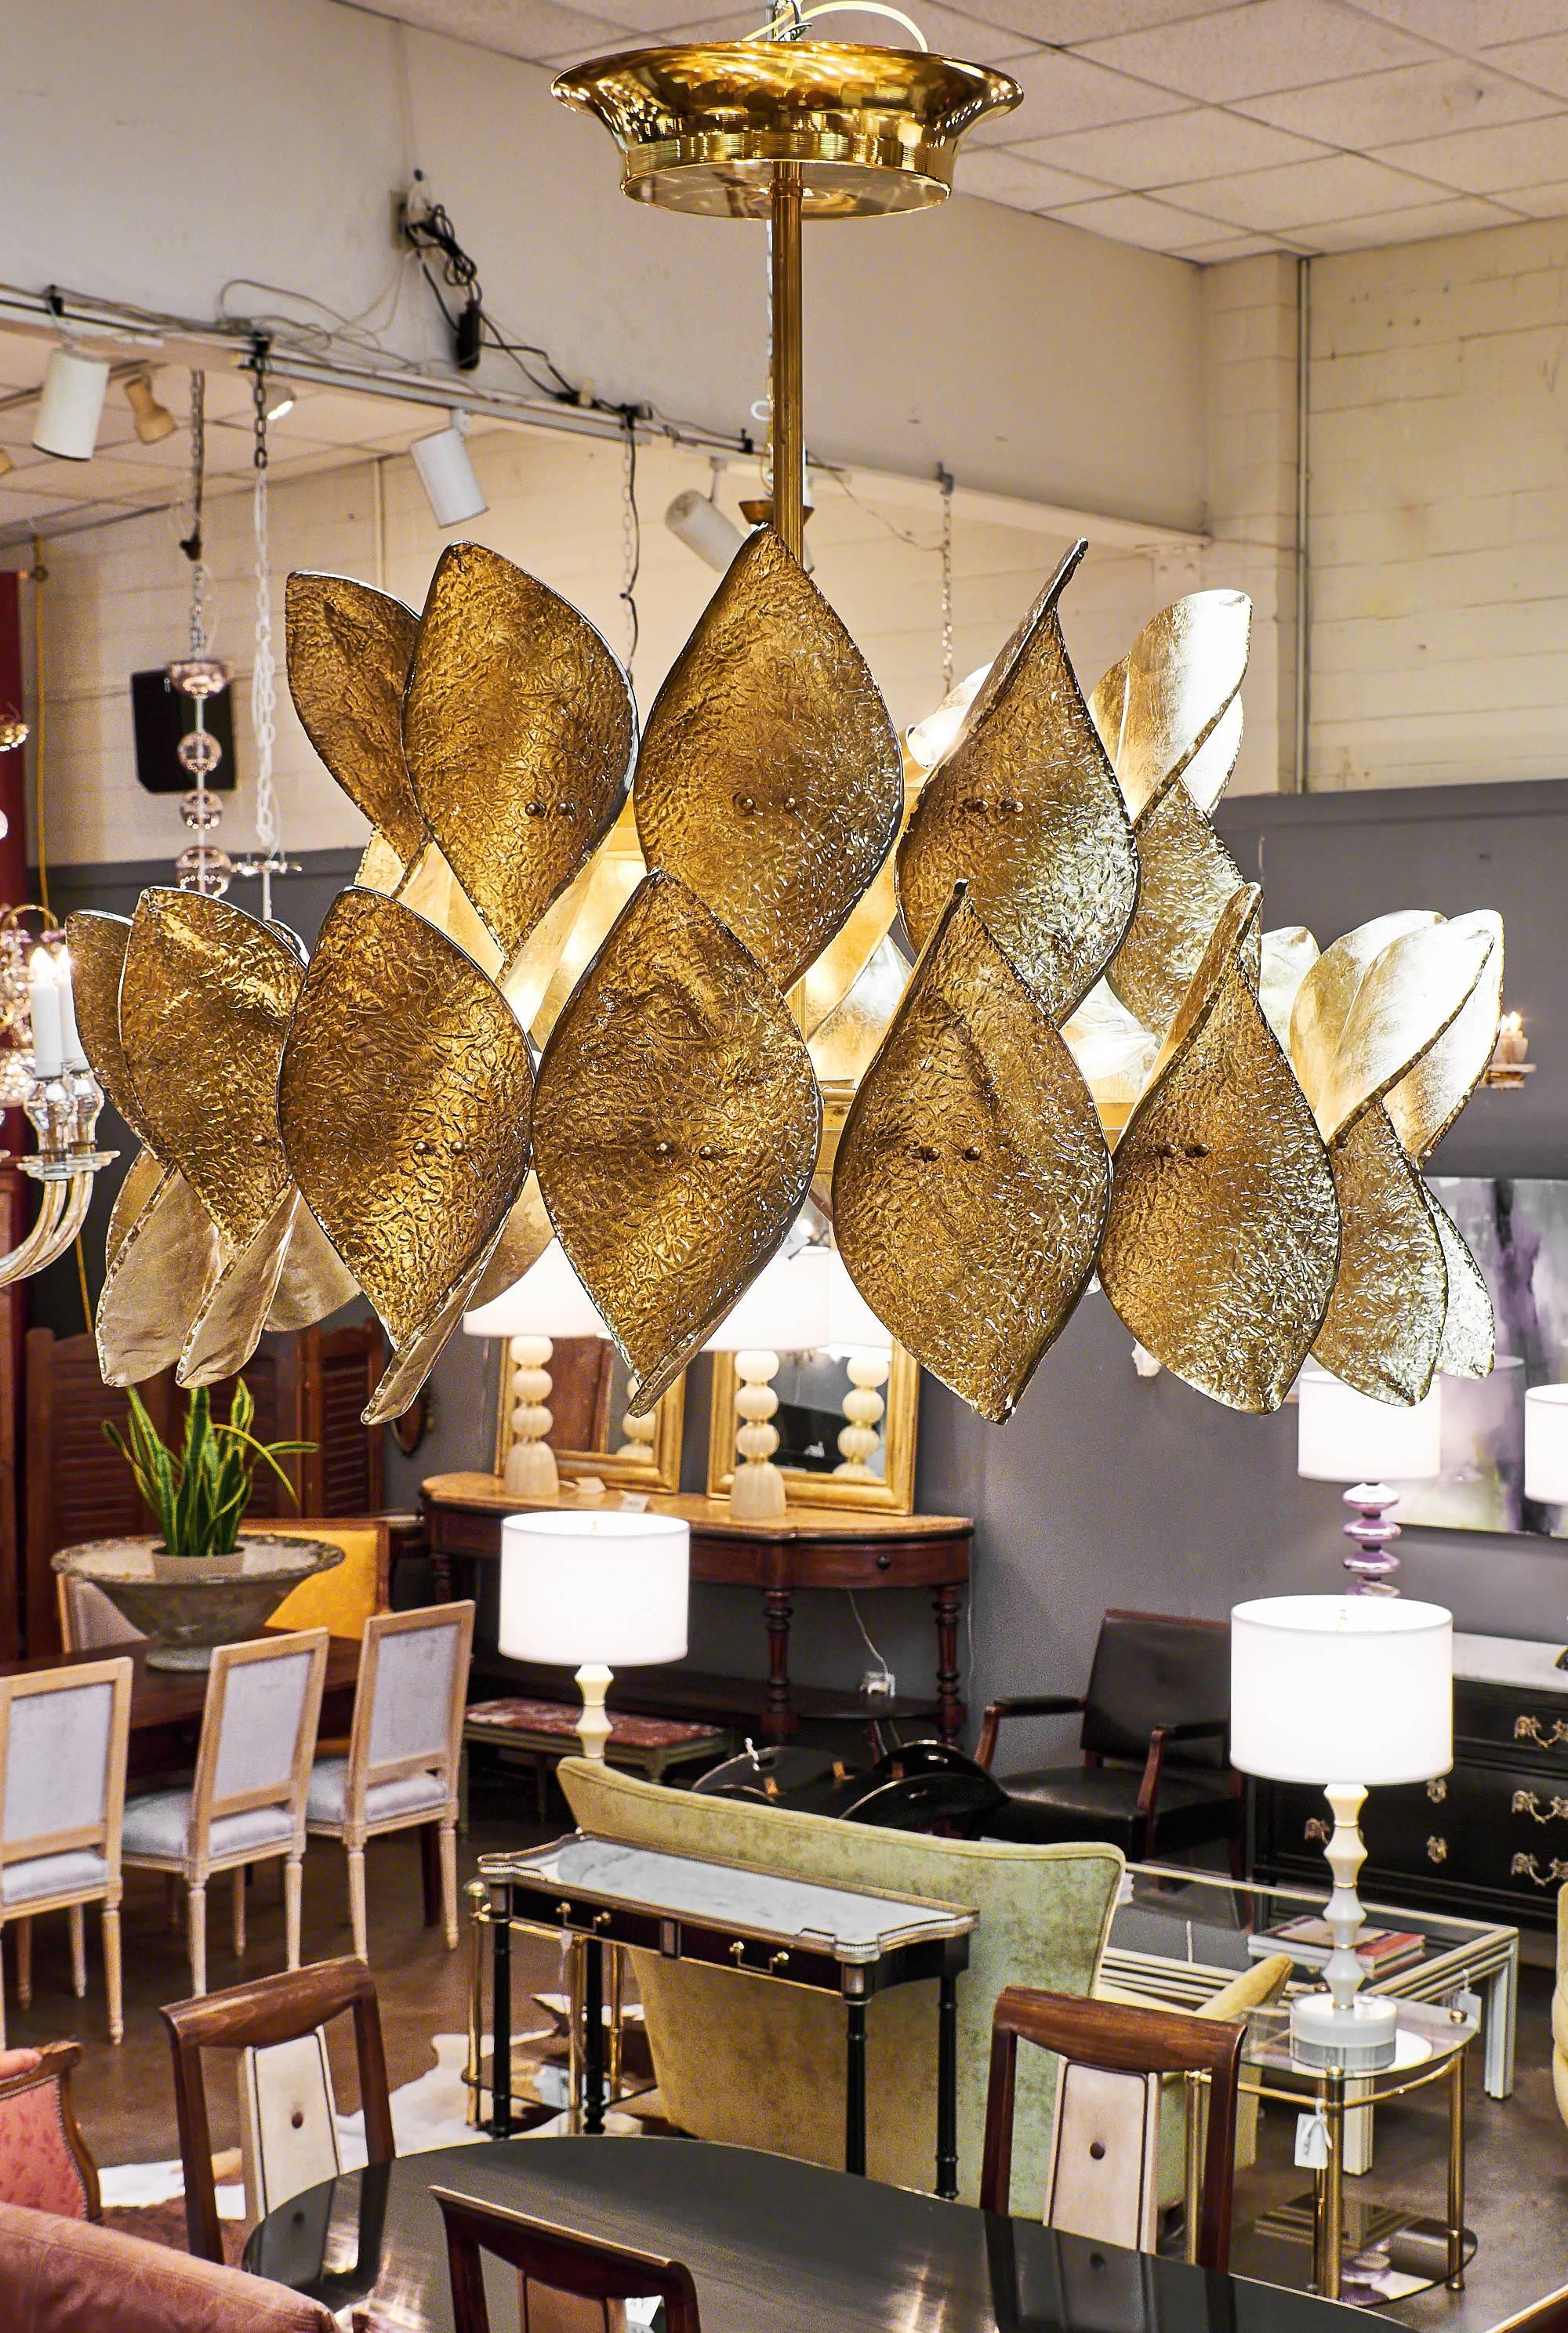 Dynamic Italian modernist chandelier from the island of Murano. The brass structure sustains on two levels an array of glass leaves fused with 23-carat gold leafing. The thick leaves are expertly crafted and textured while still in fusion to provide